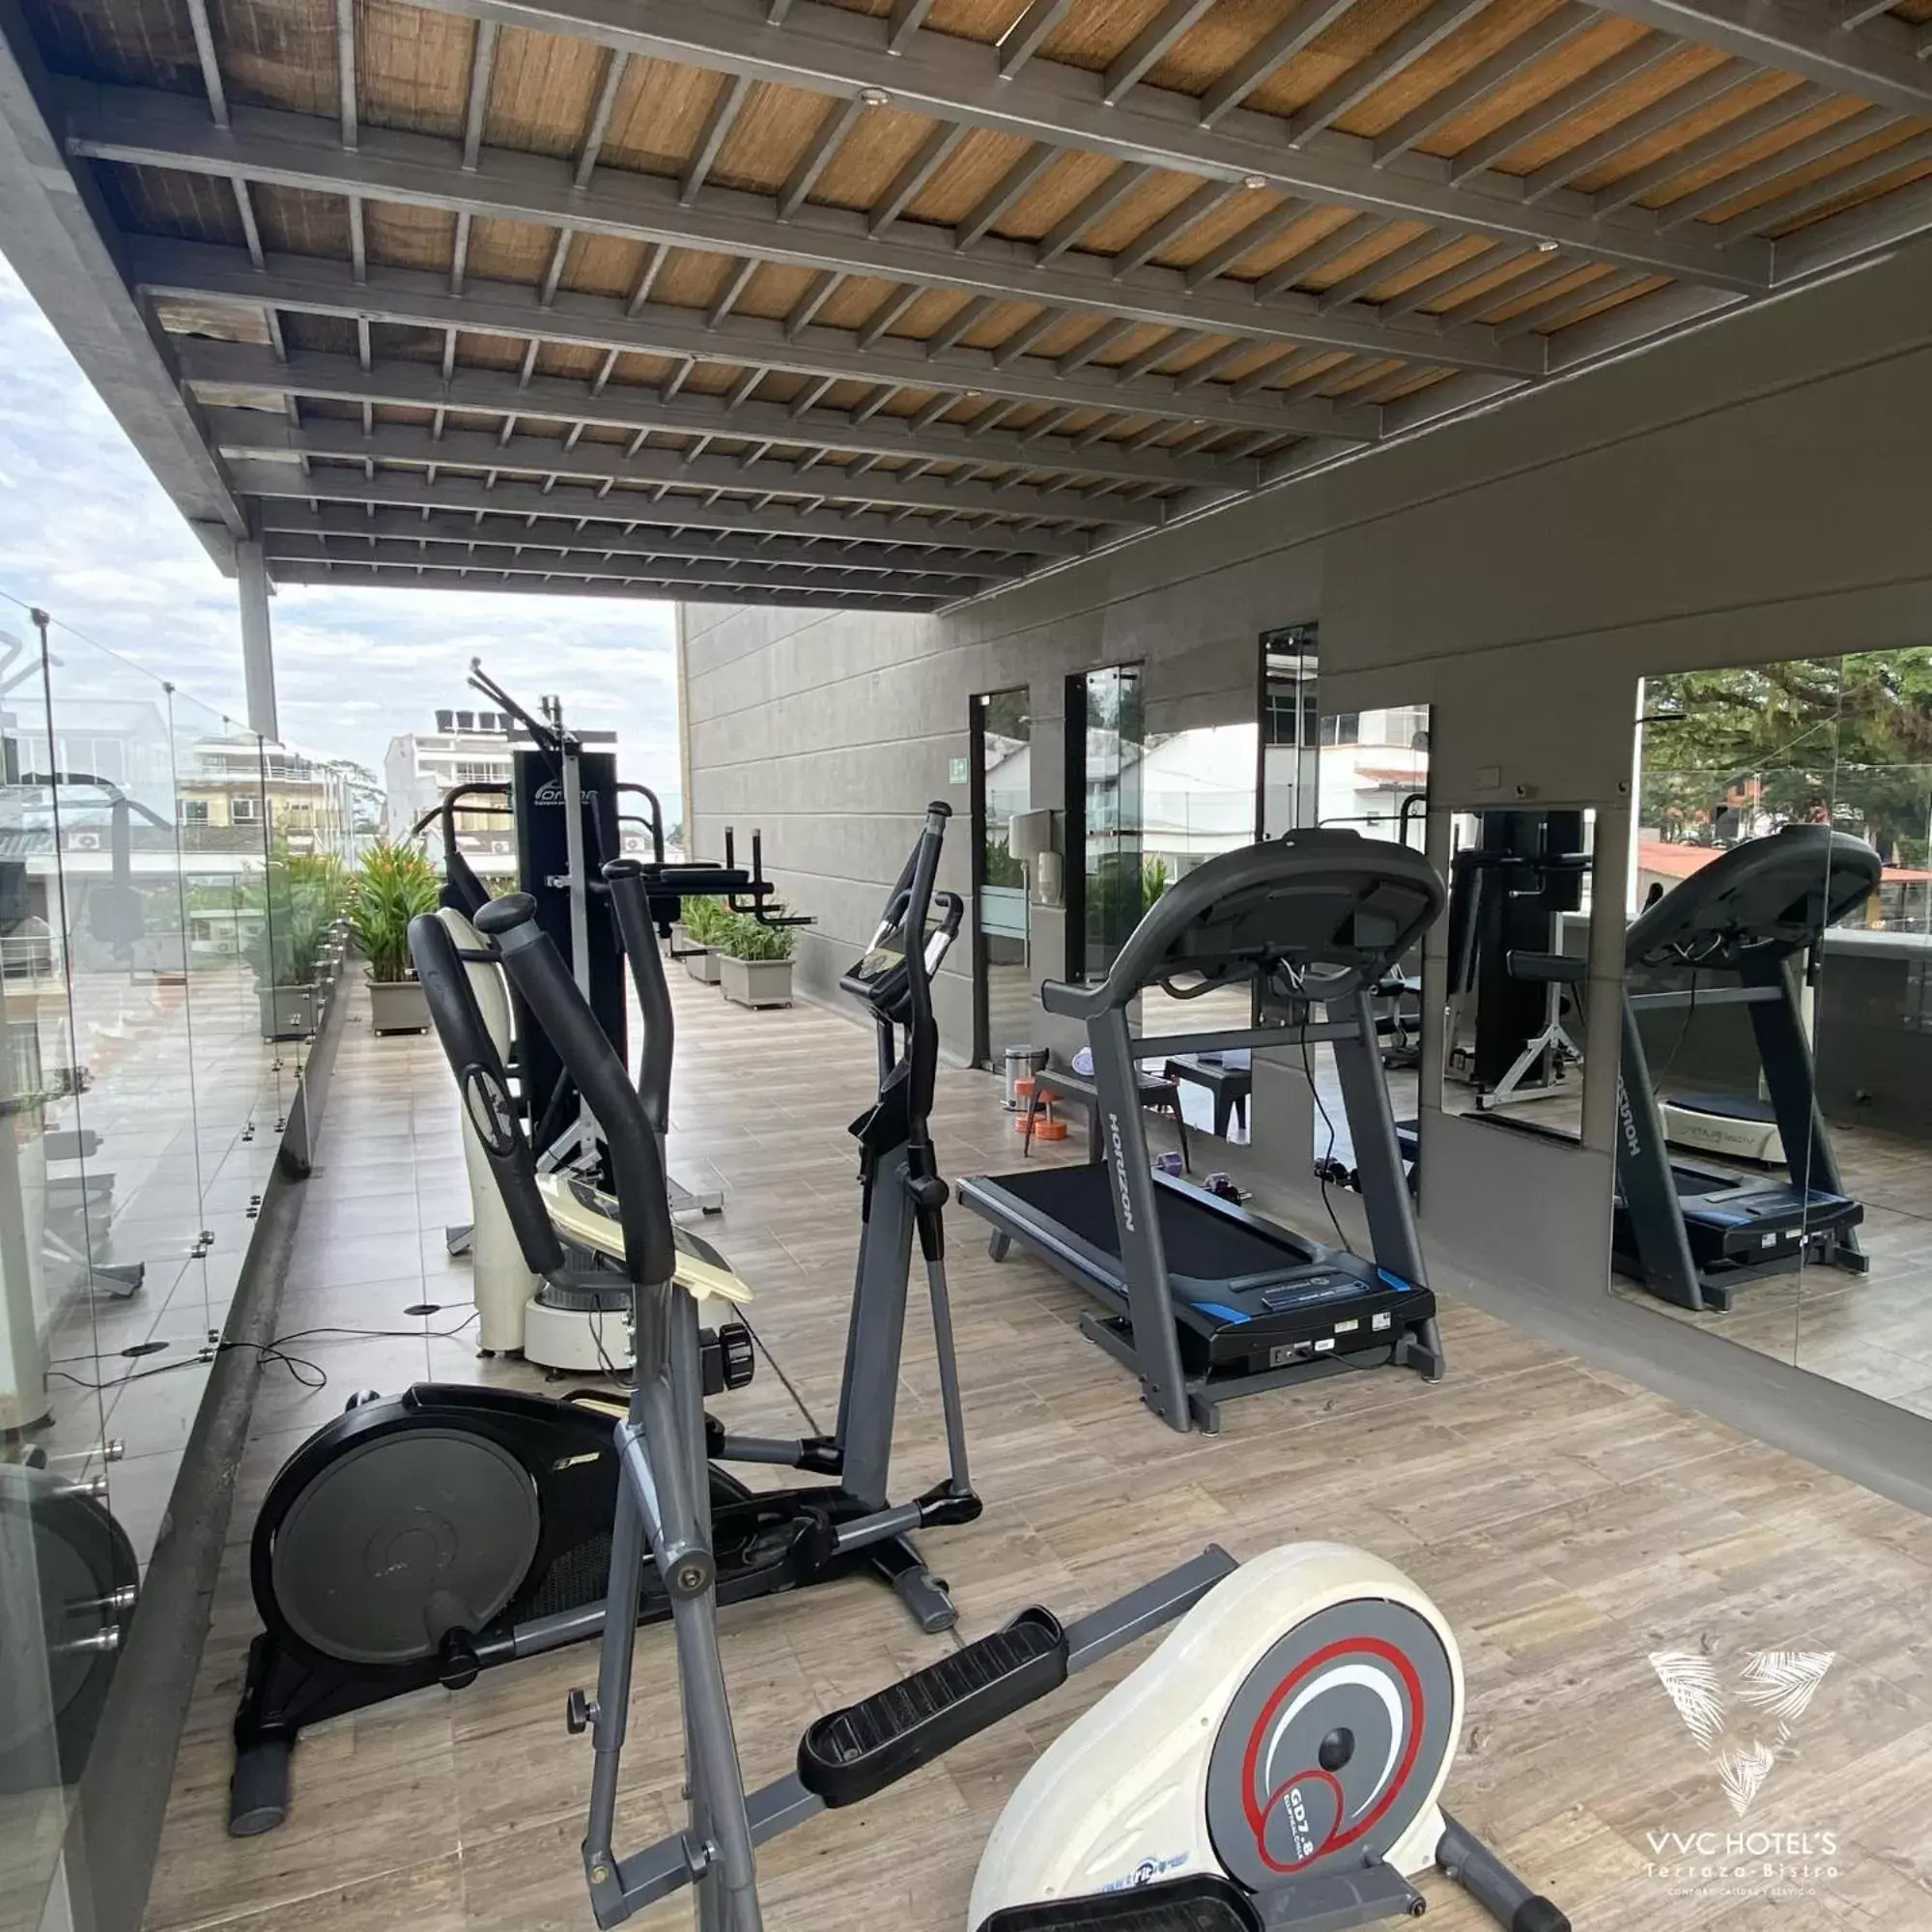 Fitness centre/facilities, Fitness Center/Facilities in VVC Hotel's